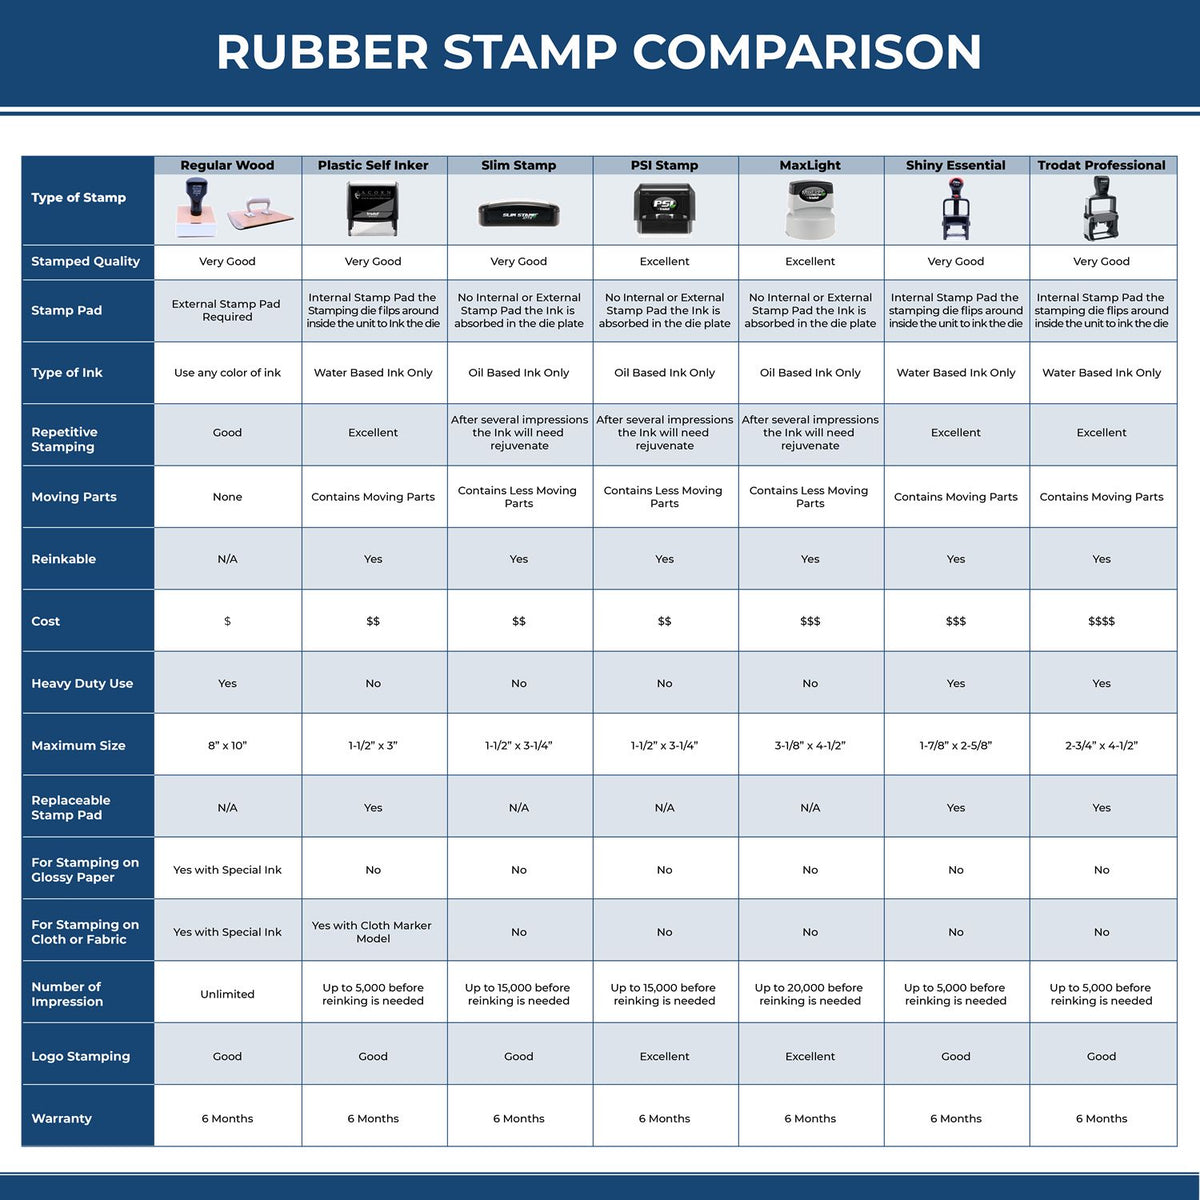 A comparison chart for the different types of mount models available for the MaxLight Premium Pre-Inked Mississippi State Seal Notarial Stamp.